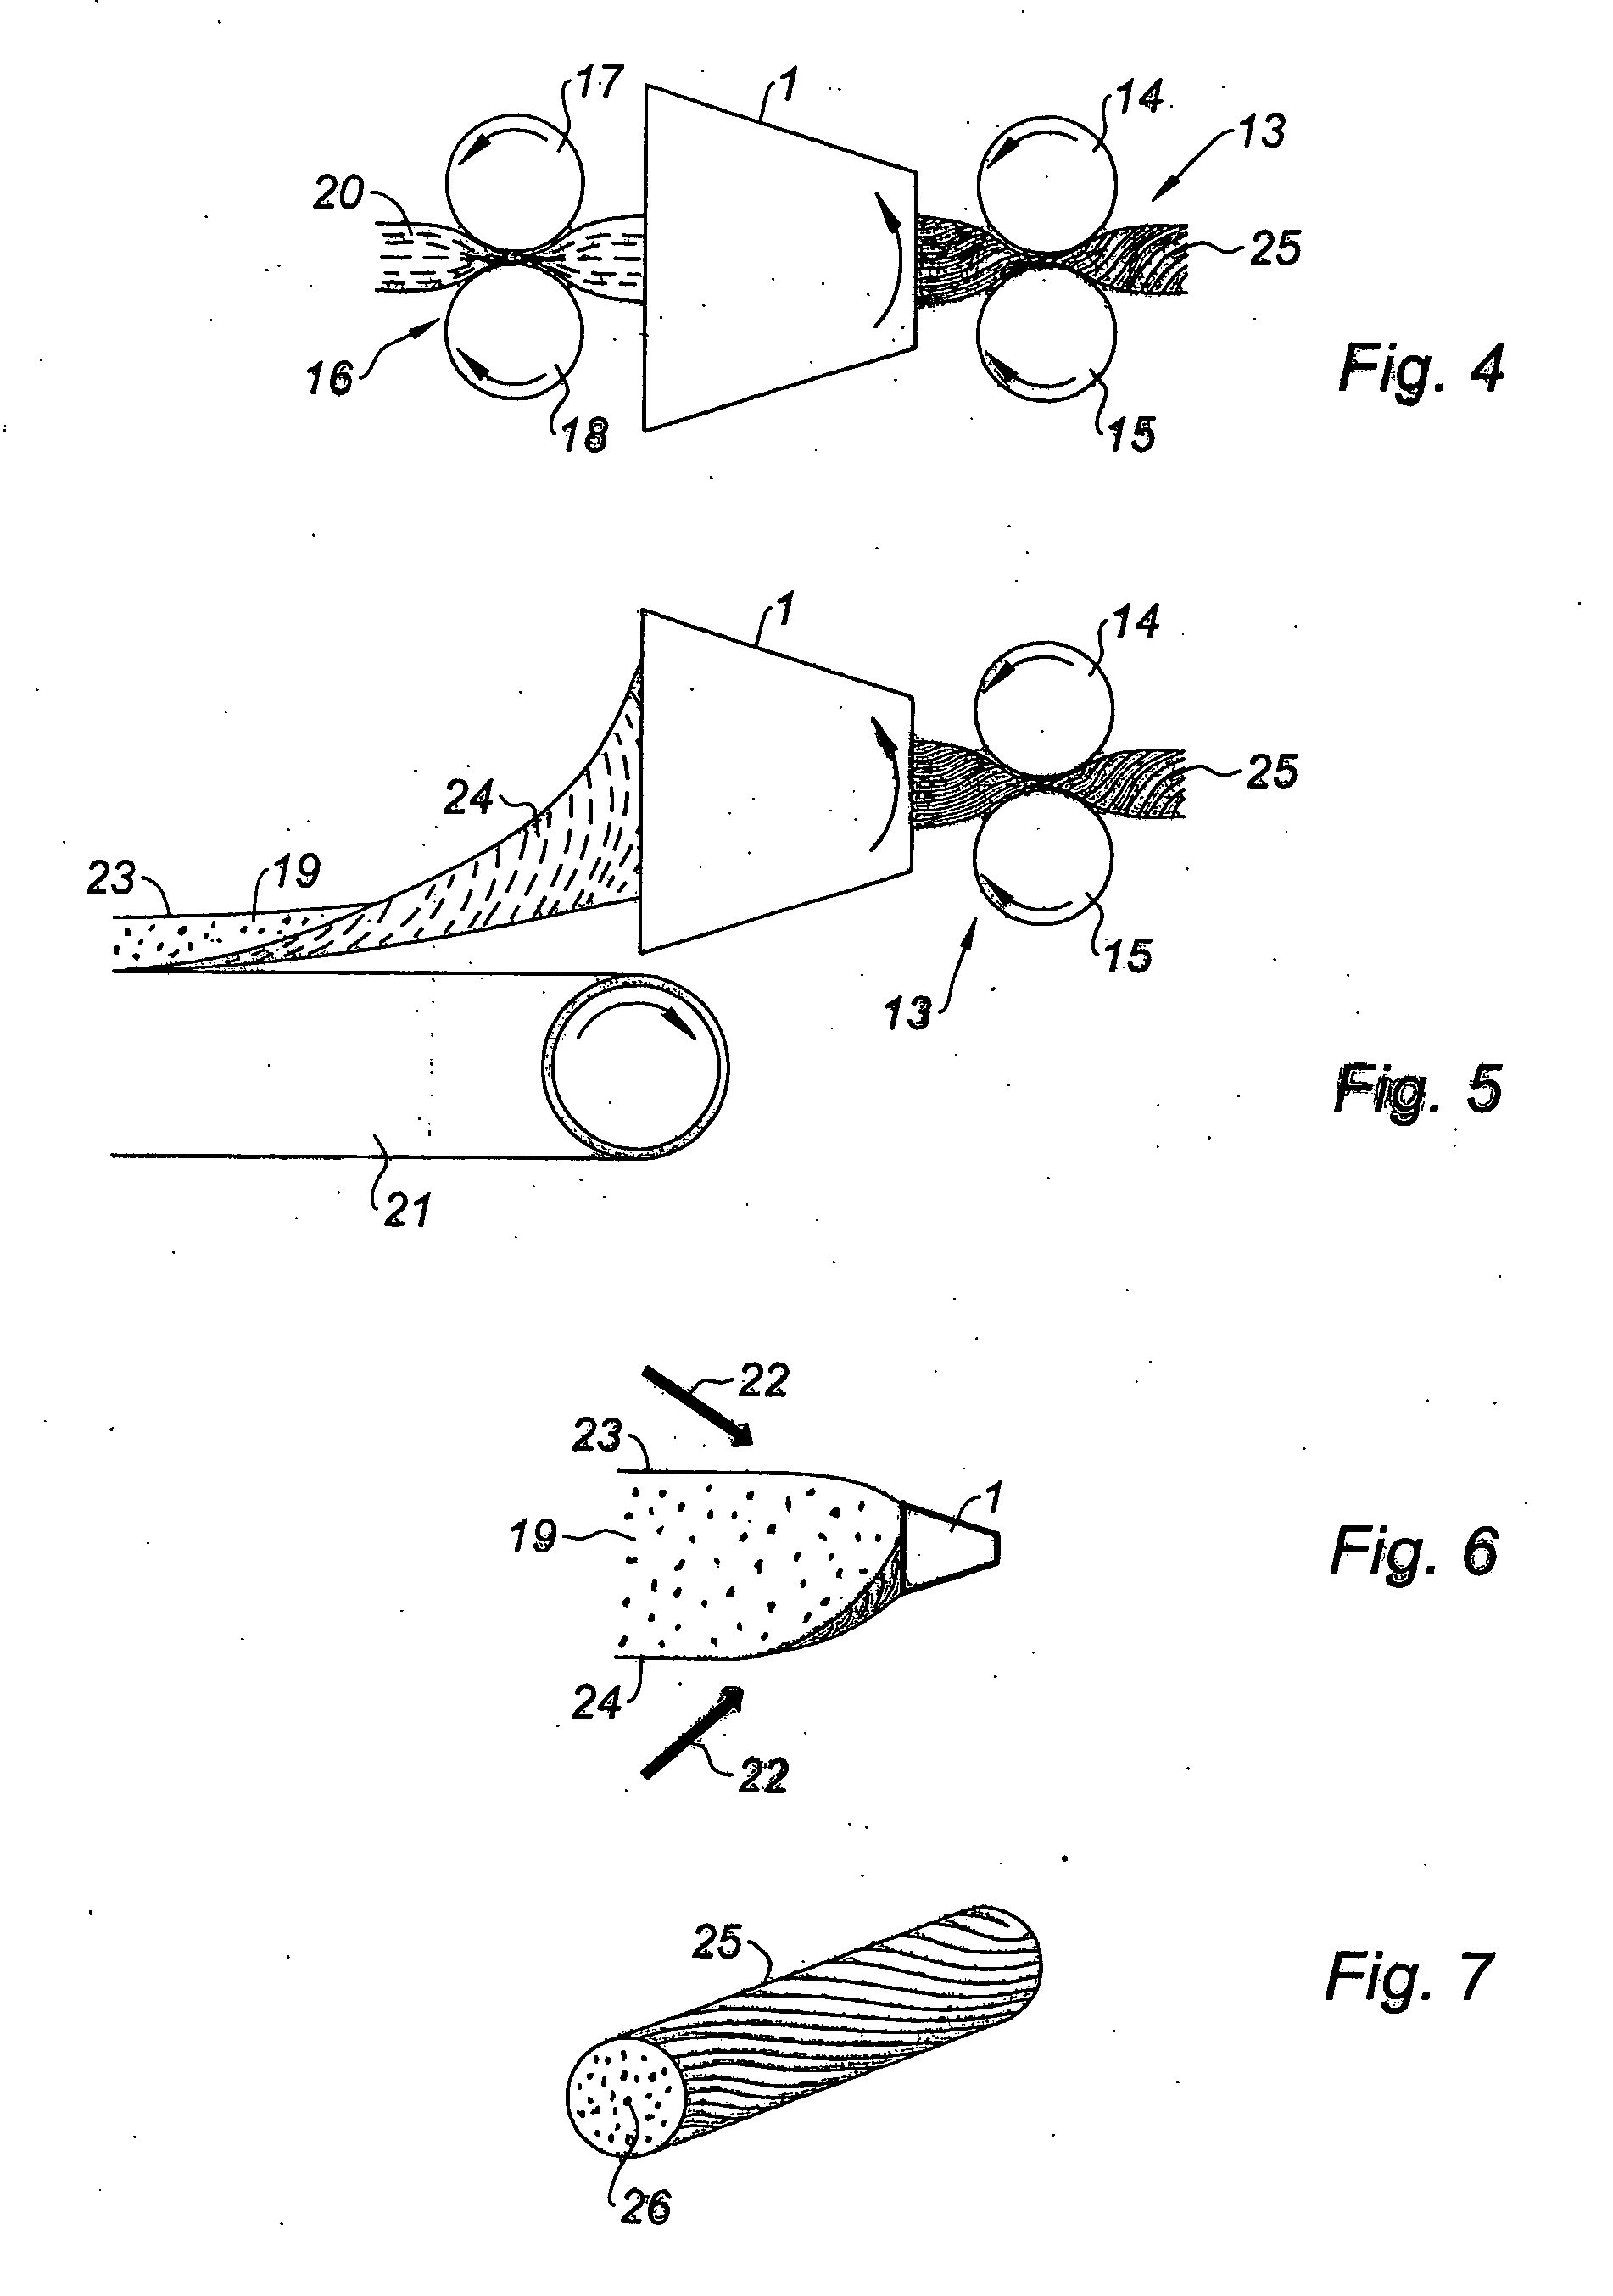 Method and system for producing dressing products of polymer fibres useful for covering moist wounds